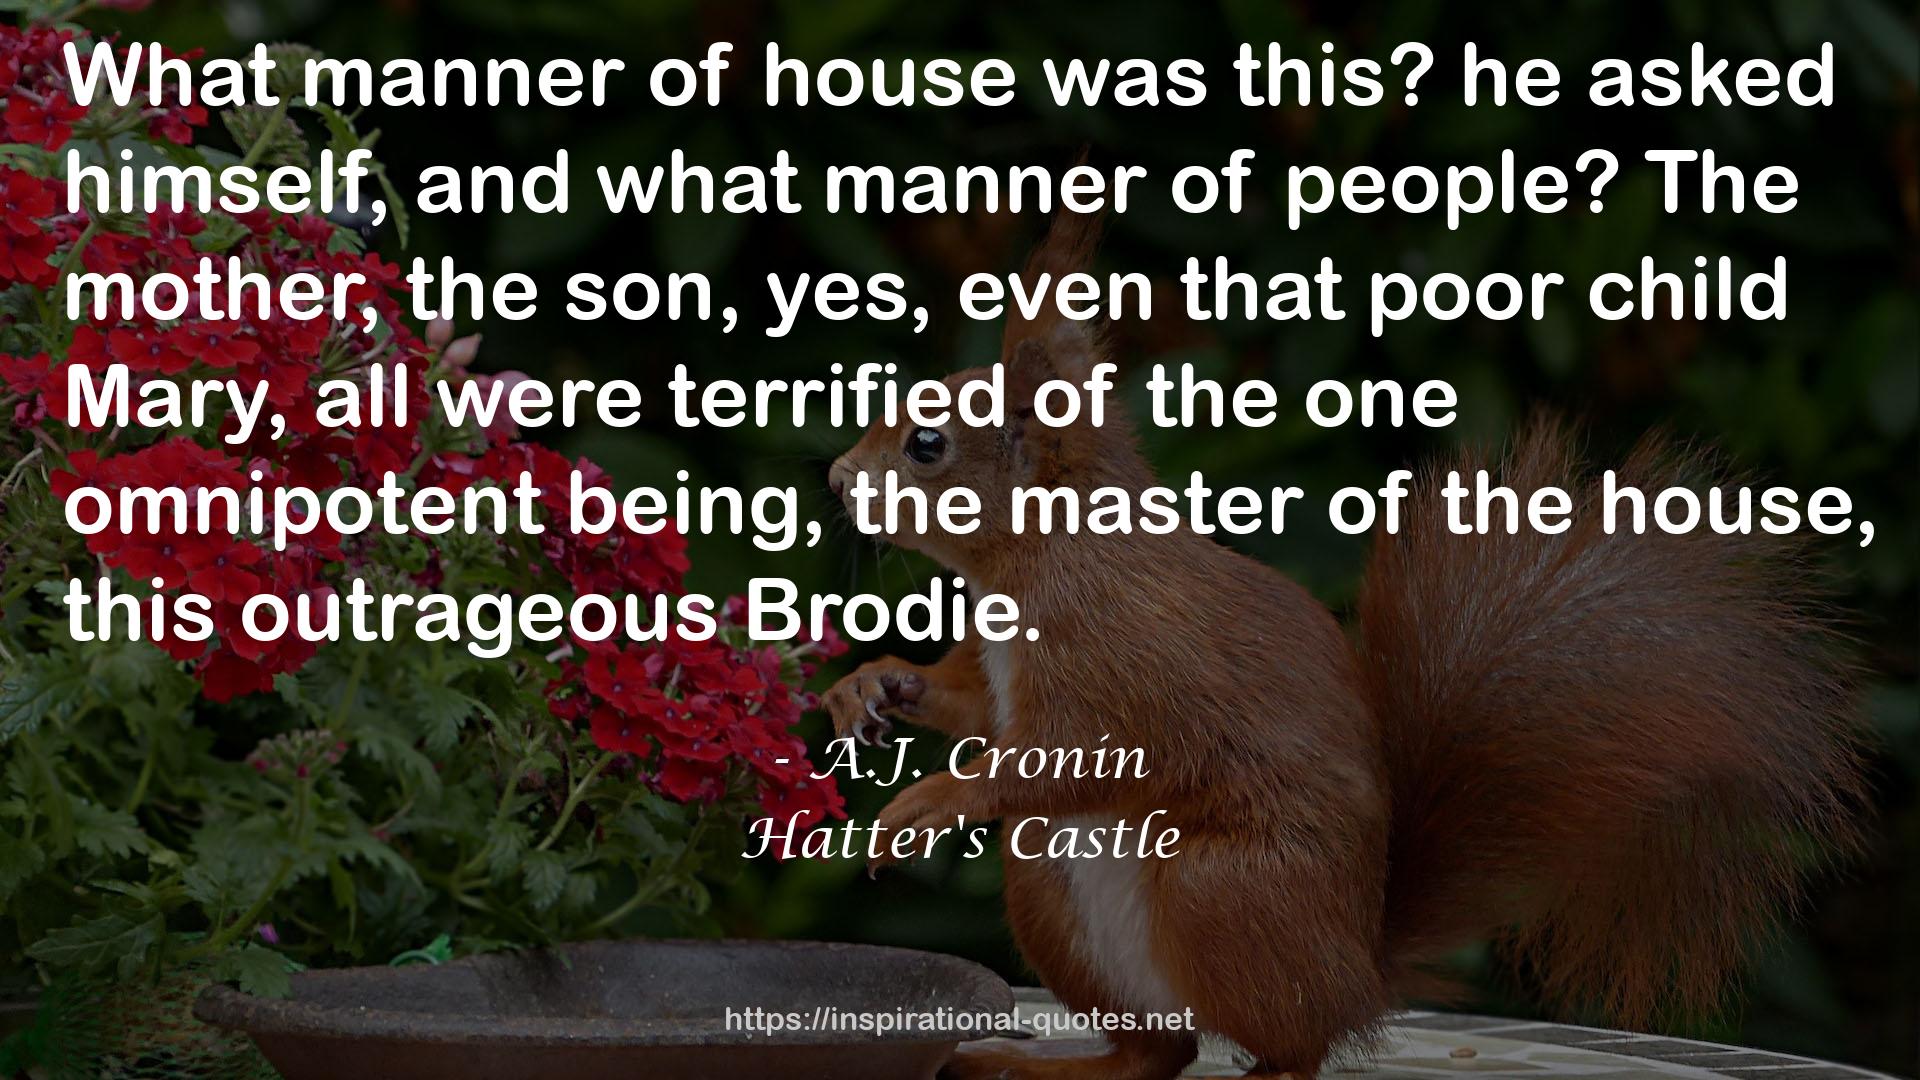 A.J. Cronin QUOTES